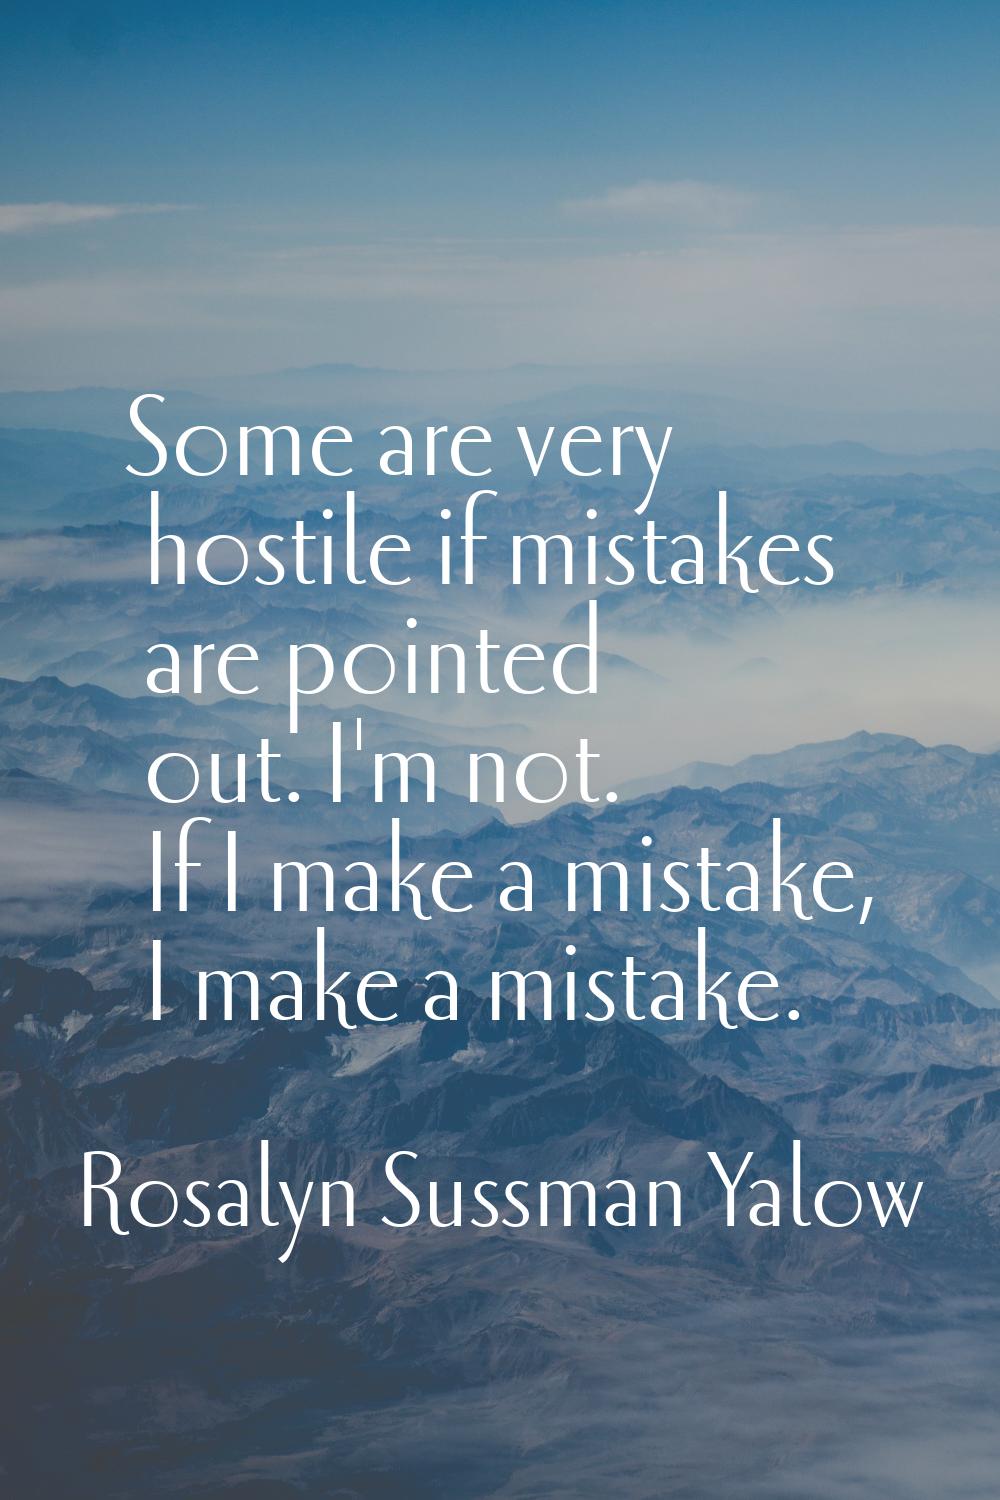 Some are very hostile if mistakes are pointed out. I'm not. If I make a mistake, I make a mistake.